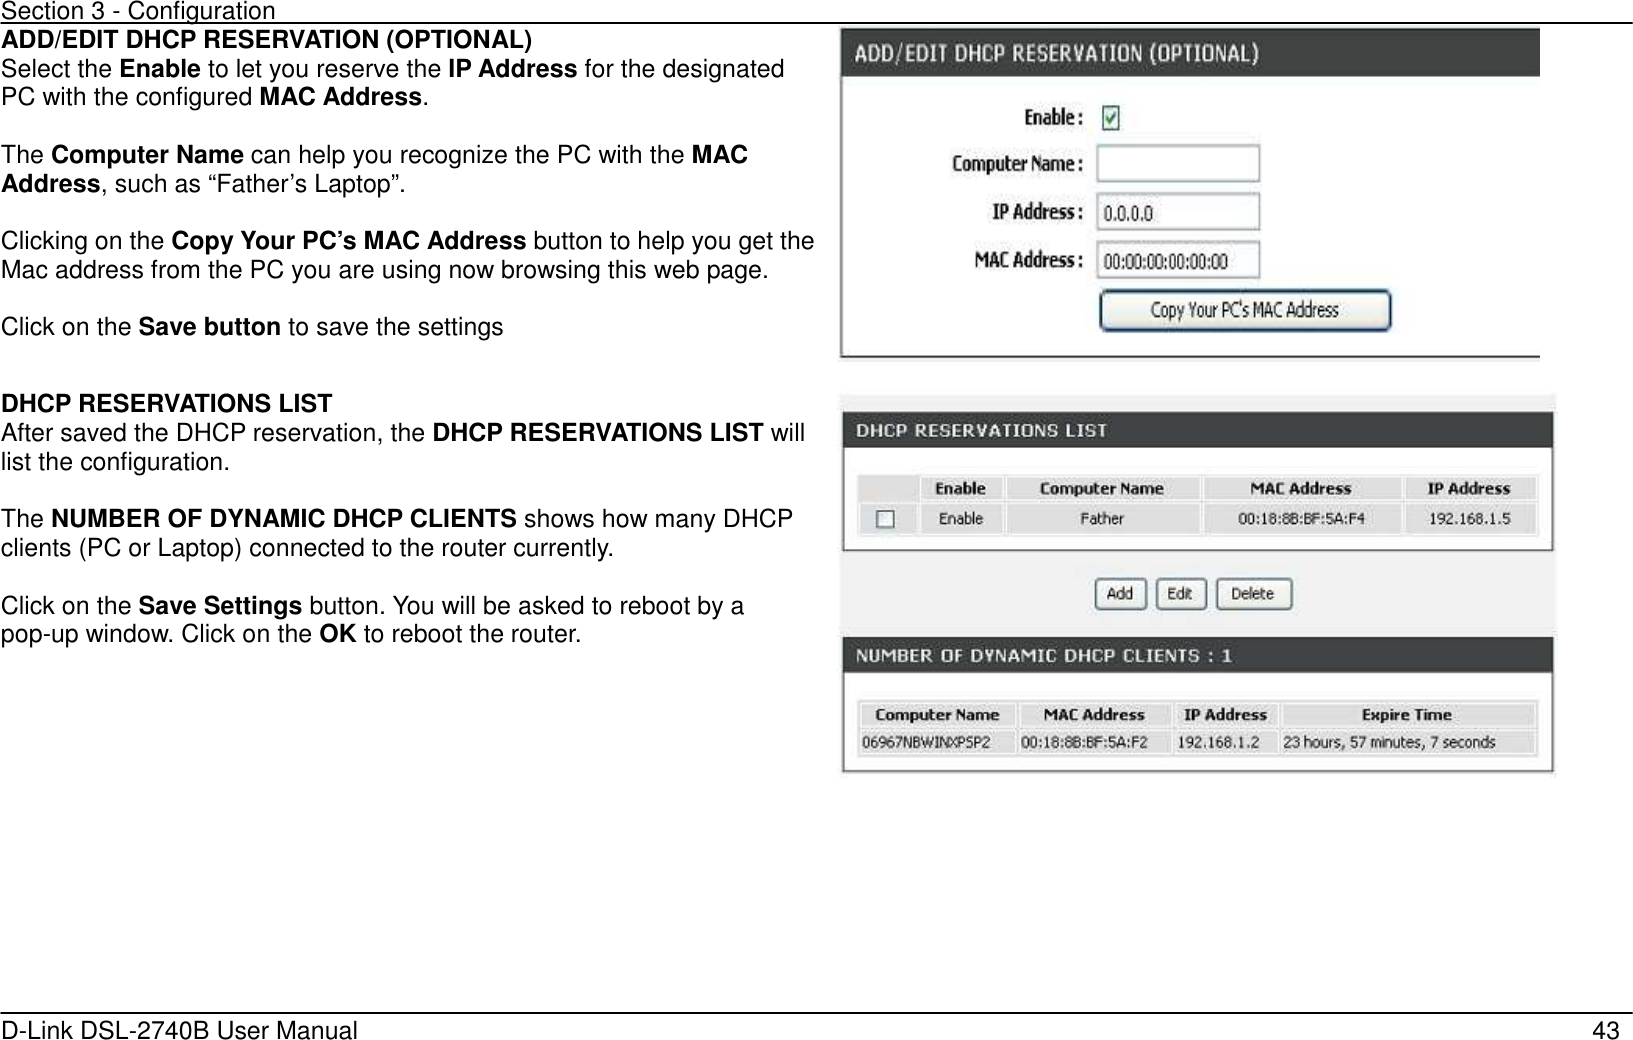 Section 3 - Configuration   D-Link DSL-2740B User Manual                                                  43 ADD/EDIT DHCP RESERVATION (OPTIONAL) Select the Enable to let you reserve the IP Address for the designated PC with the configured MAC Address.  The Computer Name can help you recognize the PC with the MAC Address, such as “Father’s Laptop”.  Clicking on the Copy Your PC’s MAC Address button to help you get the Mac address from the PC you are using now browsing this web page.  Click on the Save button to save the settings     DHCP RESERVATIONS LIST After saved the DHCP reservation, the DHCP RESERVATIONS LIST will list the configuration.  The NUMBER OF DYNAMIC DHCP CLIENTS shows how many DHCP clients (PC or Laptop) connected to the router currently.  Click on the Save Settings button. You will be asked to reboot by a pop-up window. Click on the OK to reboot the router.    